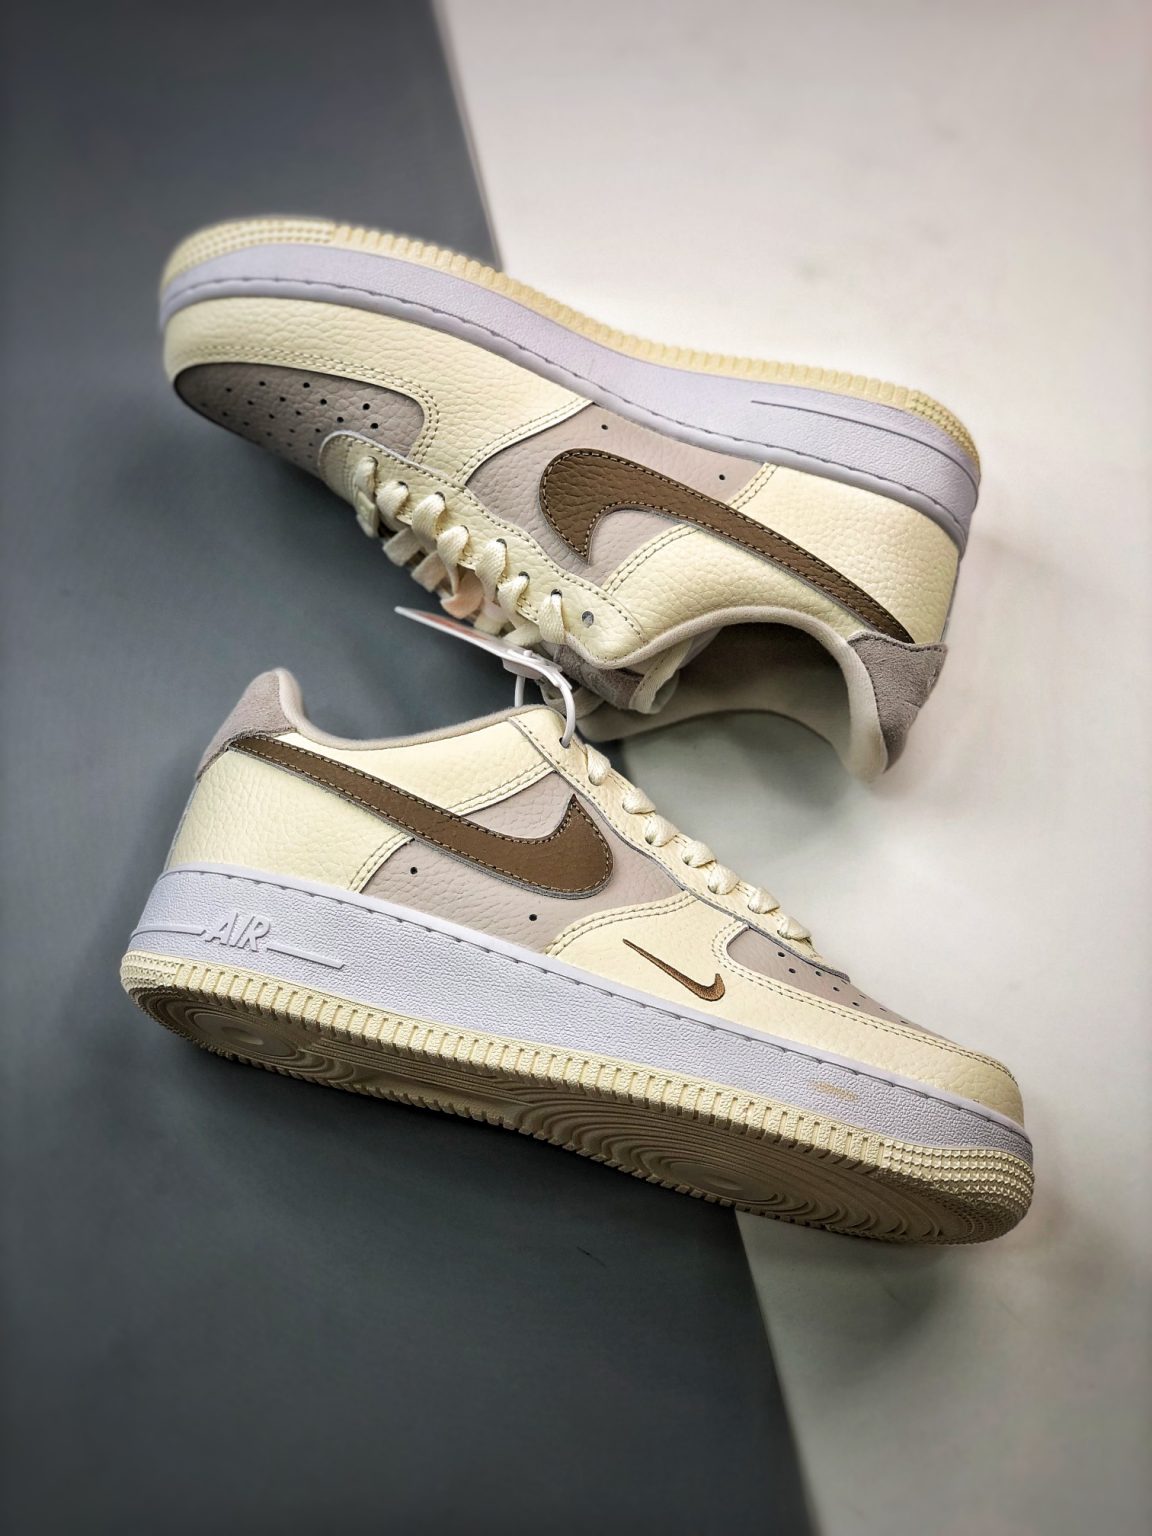 Nike Air Force 1 Low Fossil Grey FB8483-100 For Sale – Sneaker Hello